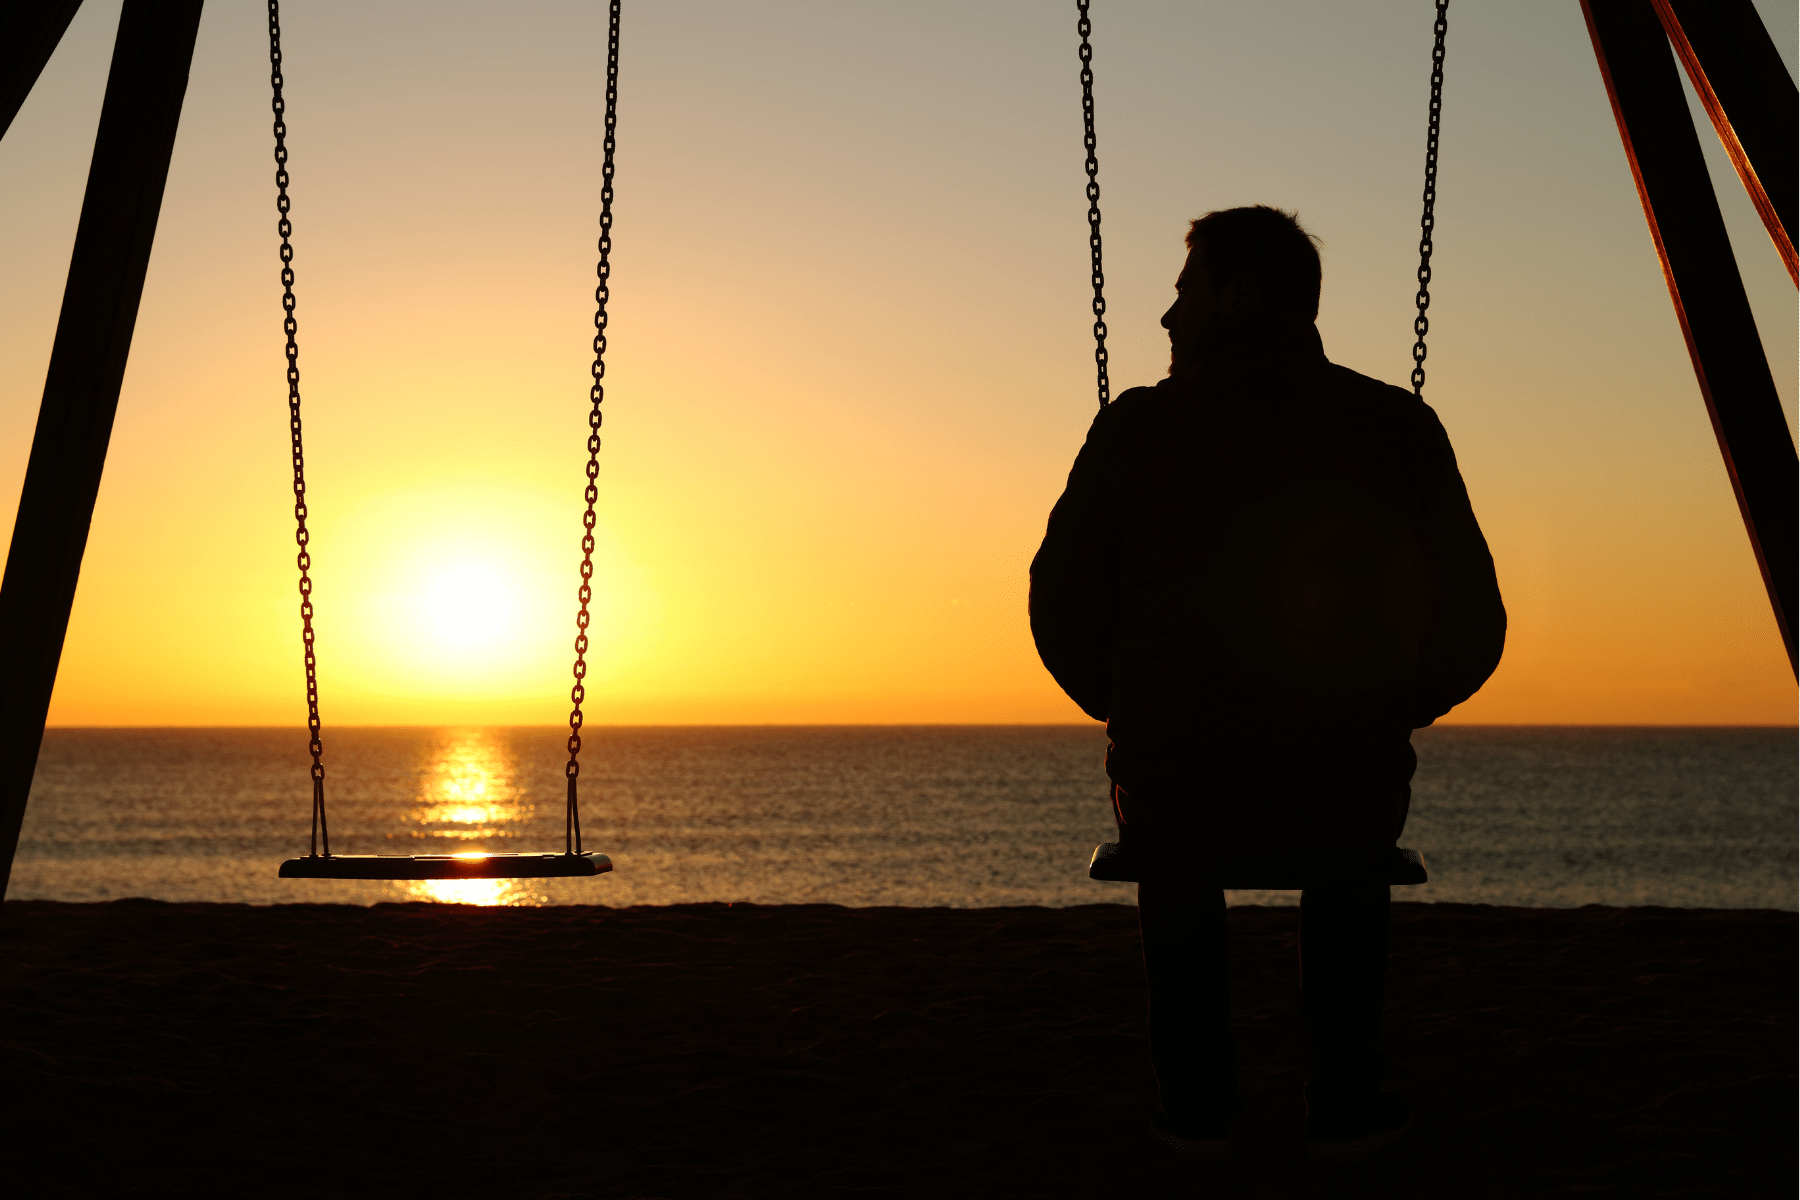 picture of a person sitting on a swing next to an empty seat while looking at the sunset.